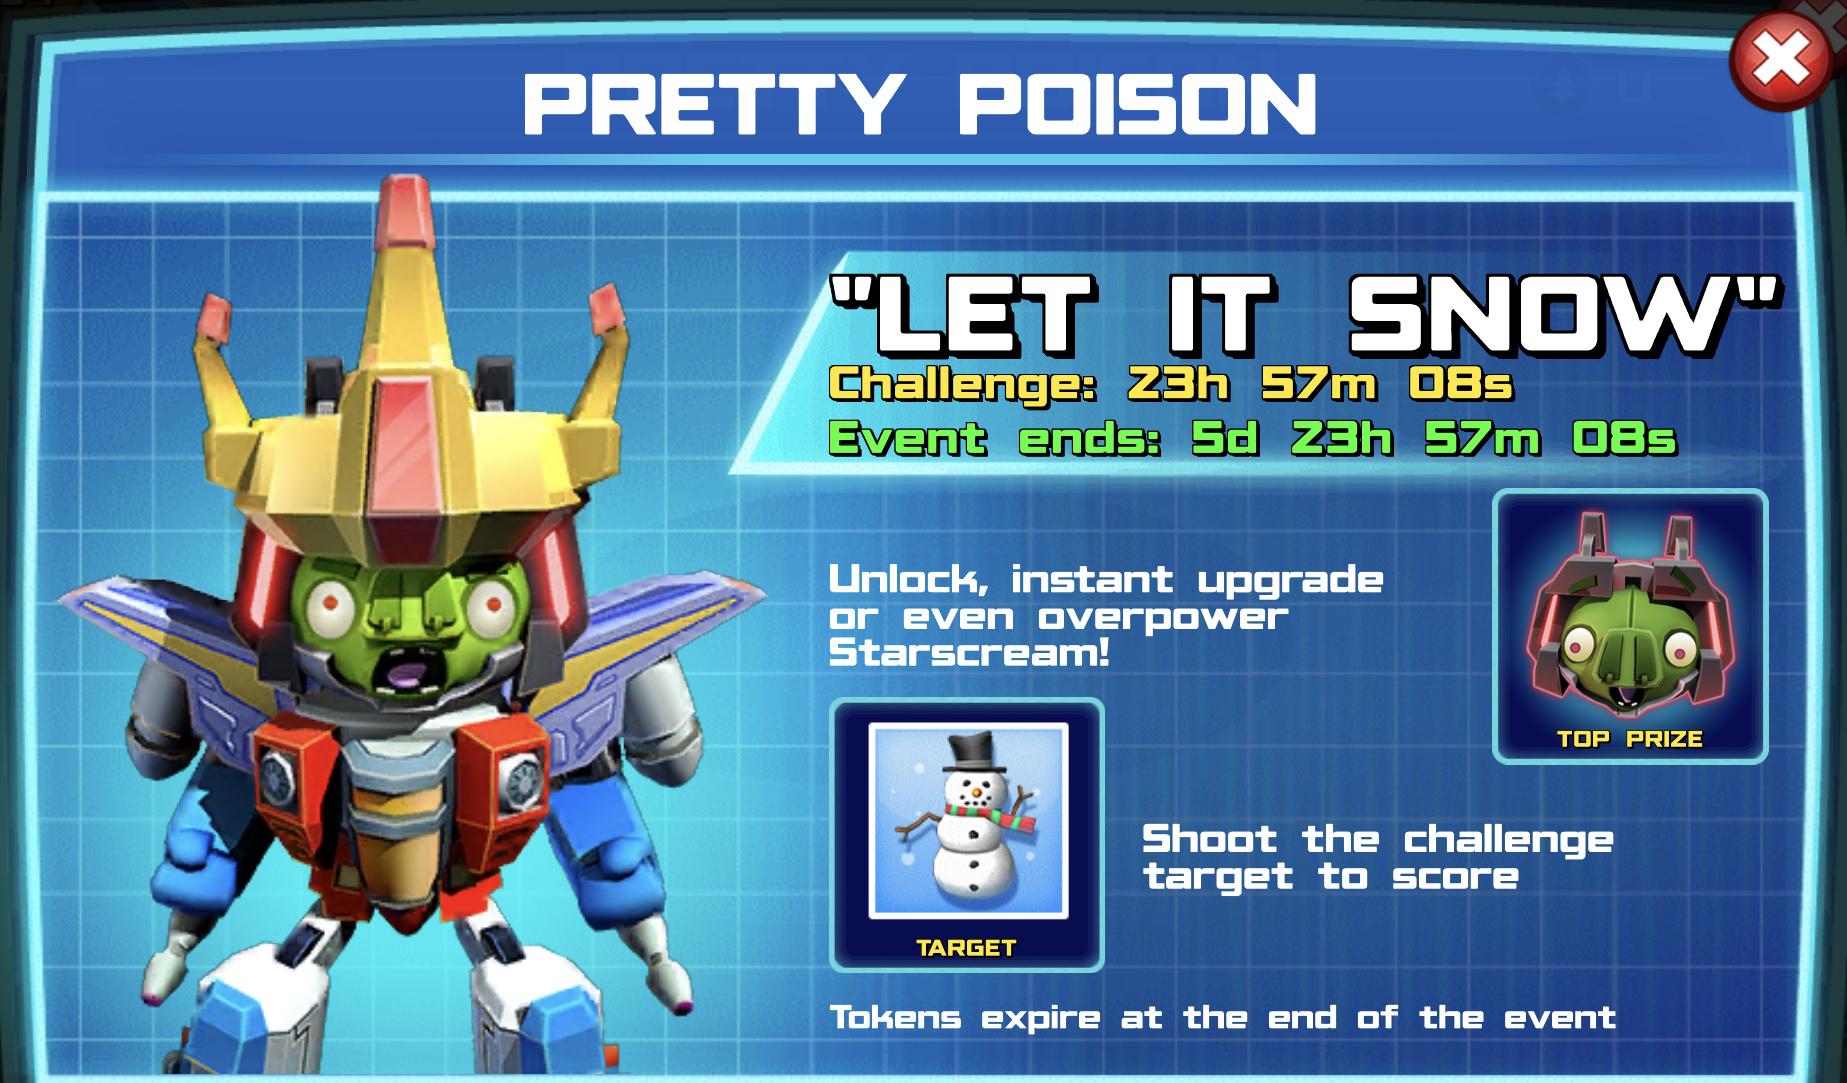 The event banner for Pretty Poison